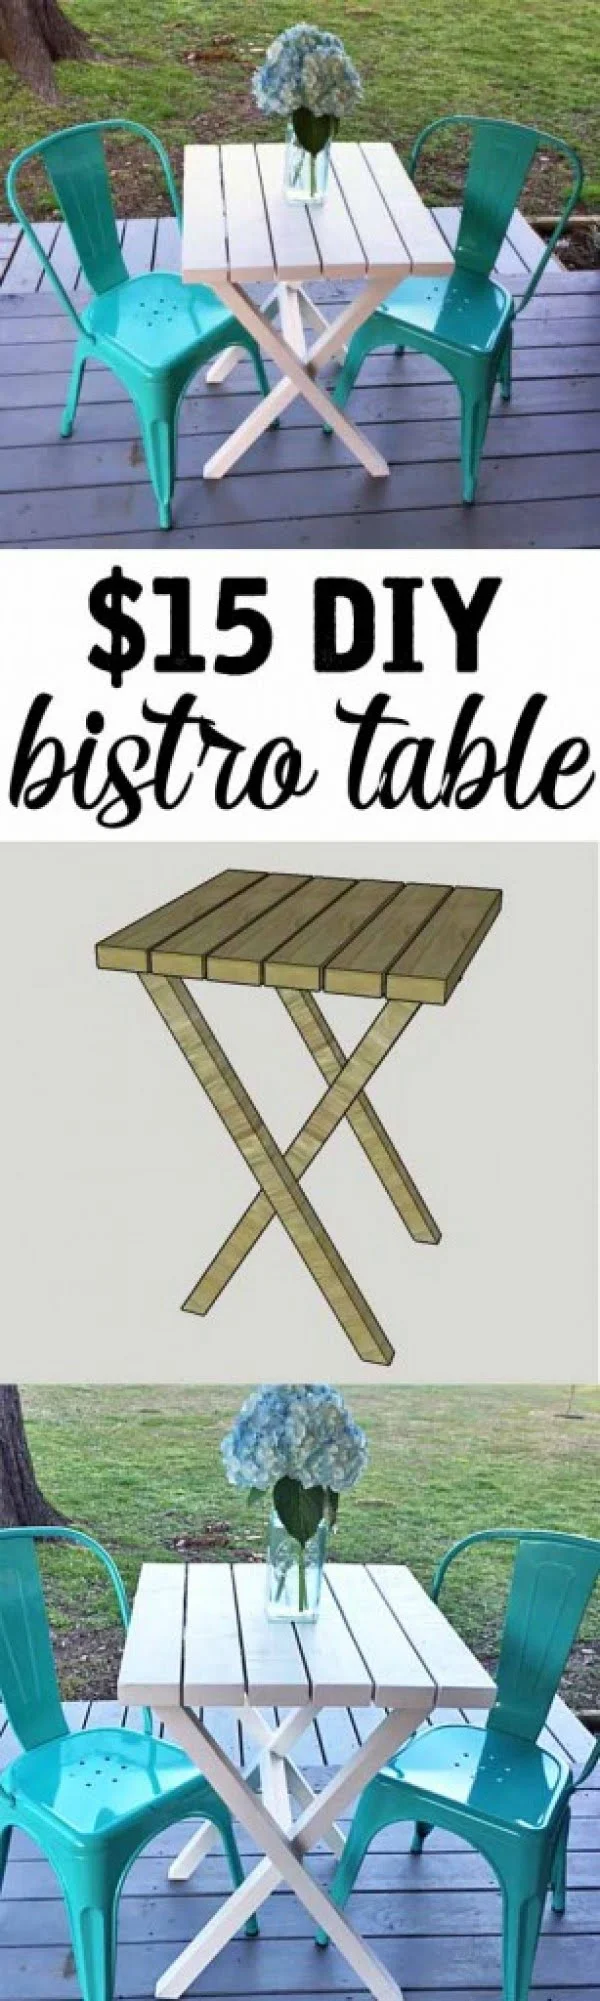 20 Crafty 2x4 DIY Projects That You Can Easily Make - Make this easy DIY bistro table for under $15